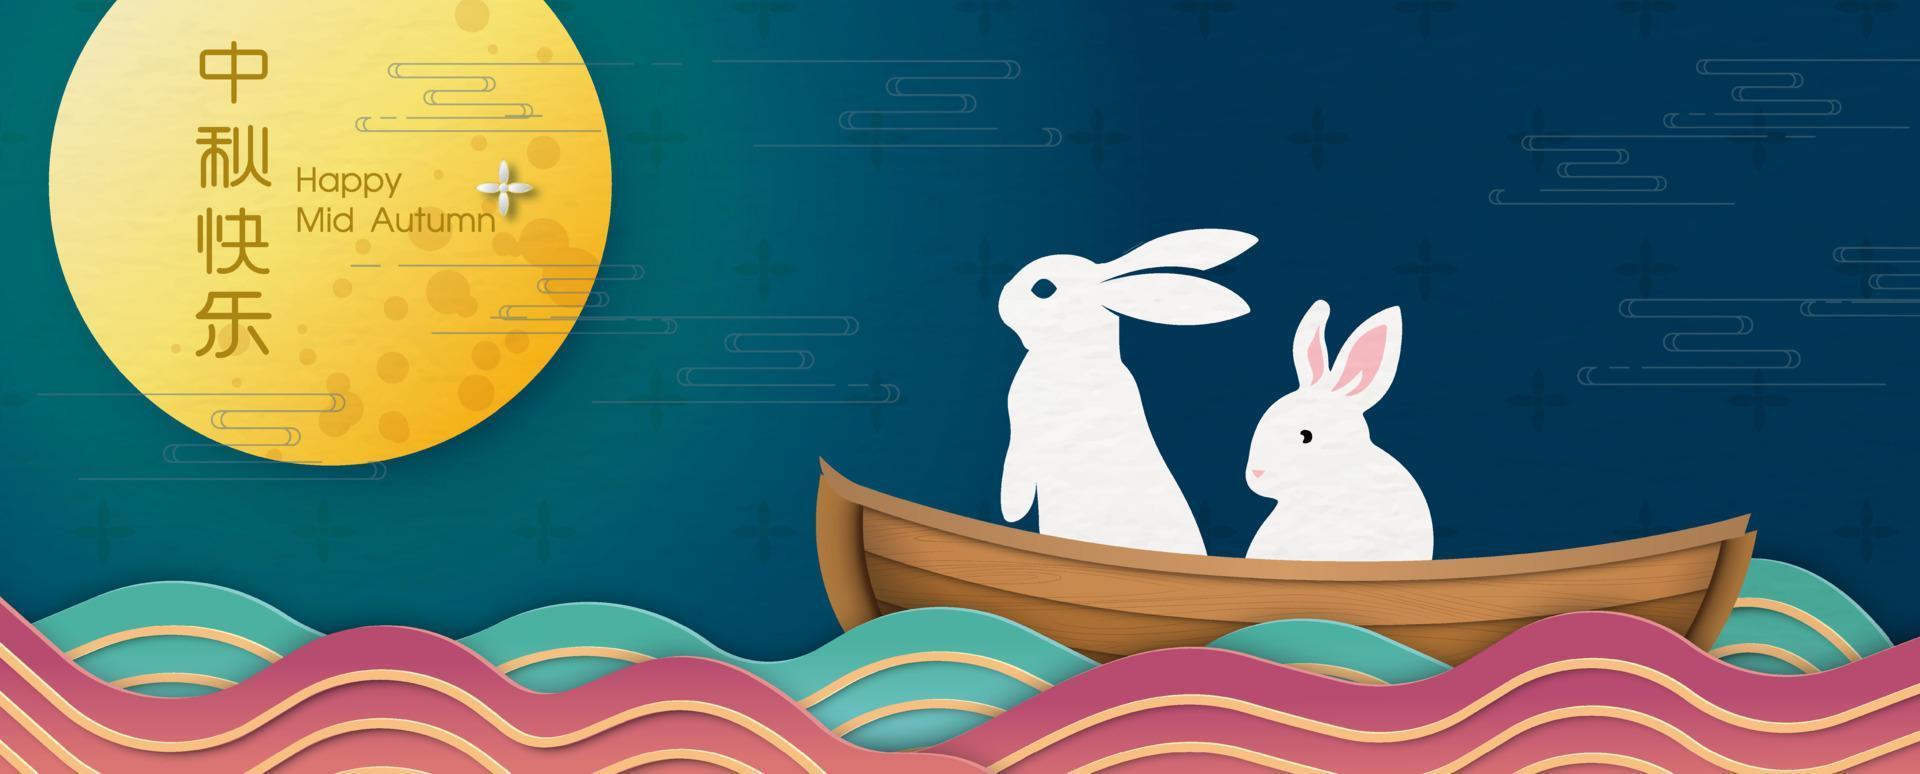 Rabbits make a wish on a wooden boat at sea with bright full moon in Mid autumn festival. All in paper cut style and Chinese texts is meaning happy mid autumn in English. vector